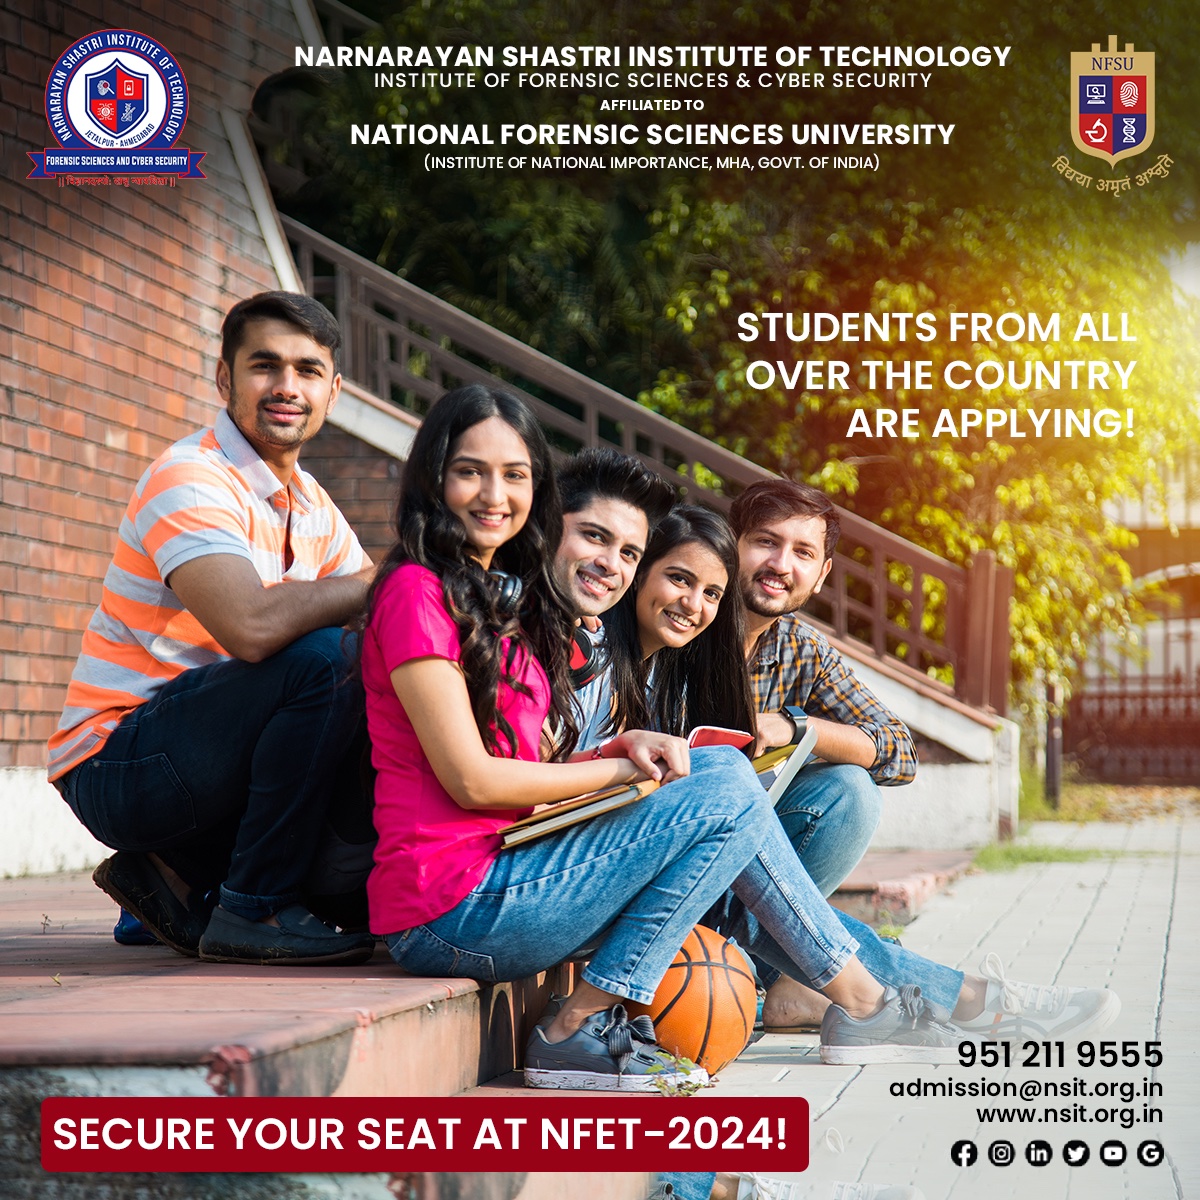 We're receiving applications from all over the country

#nsit #nsitjetalpur #digitalforensics #cybersecurity #ForensicScience #forensics #ahmedabad #AdmissionOpen #ifscs #security #technology #cybercrime #privacy #college #student #education #students #studentlife #universitylife